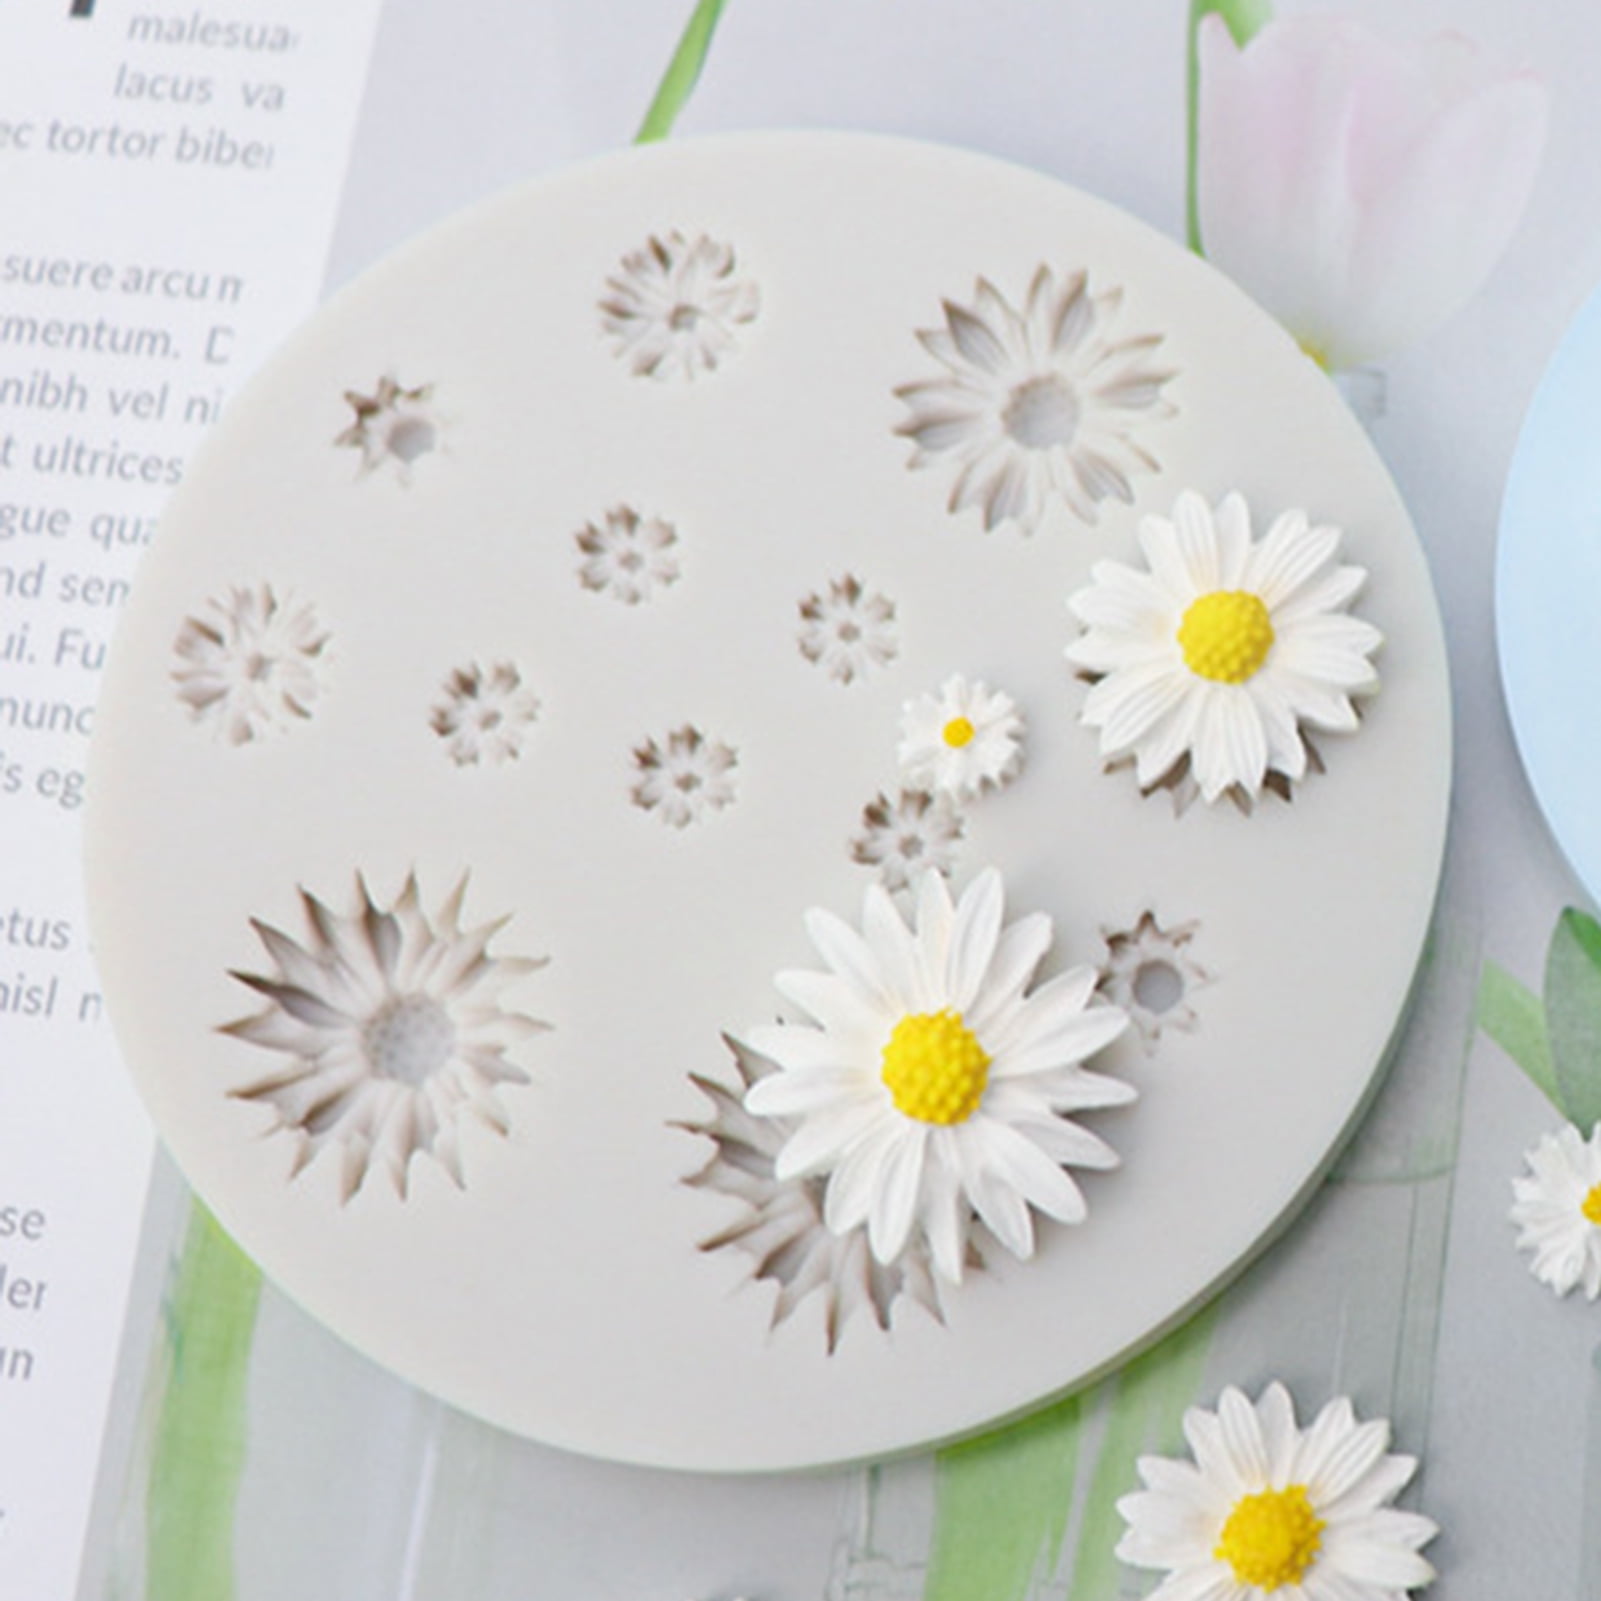 24 Cavity Flower Fondant Mold, 3D Mini Flower Silicone Mold for Chocolate  Candy, Cake Decoration, Po…See more 24 Cavity Flower Fondant Mold, 3D Mini